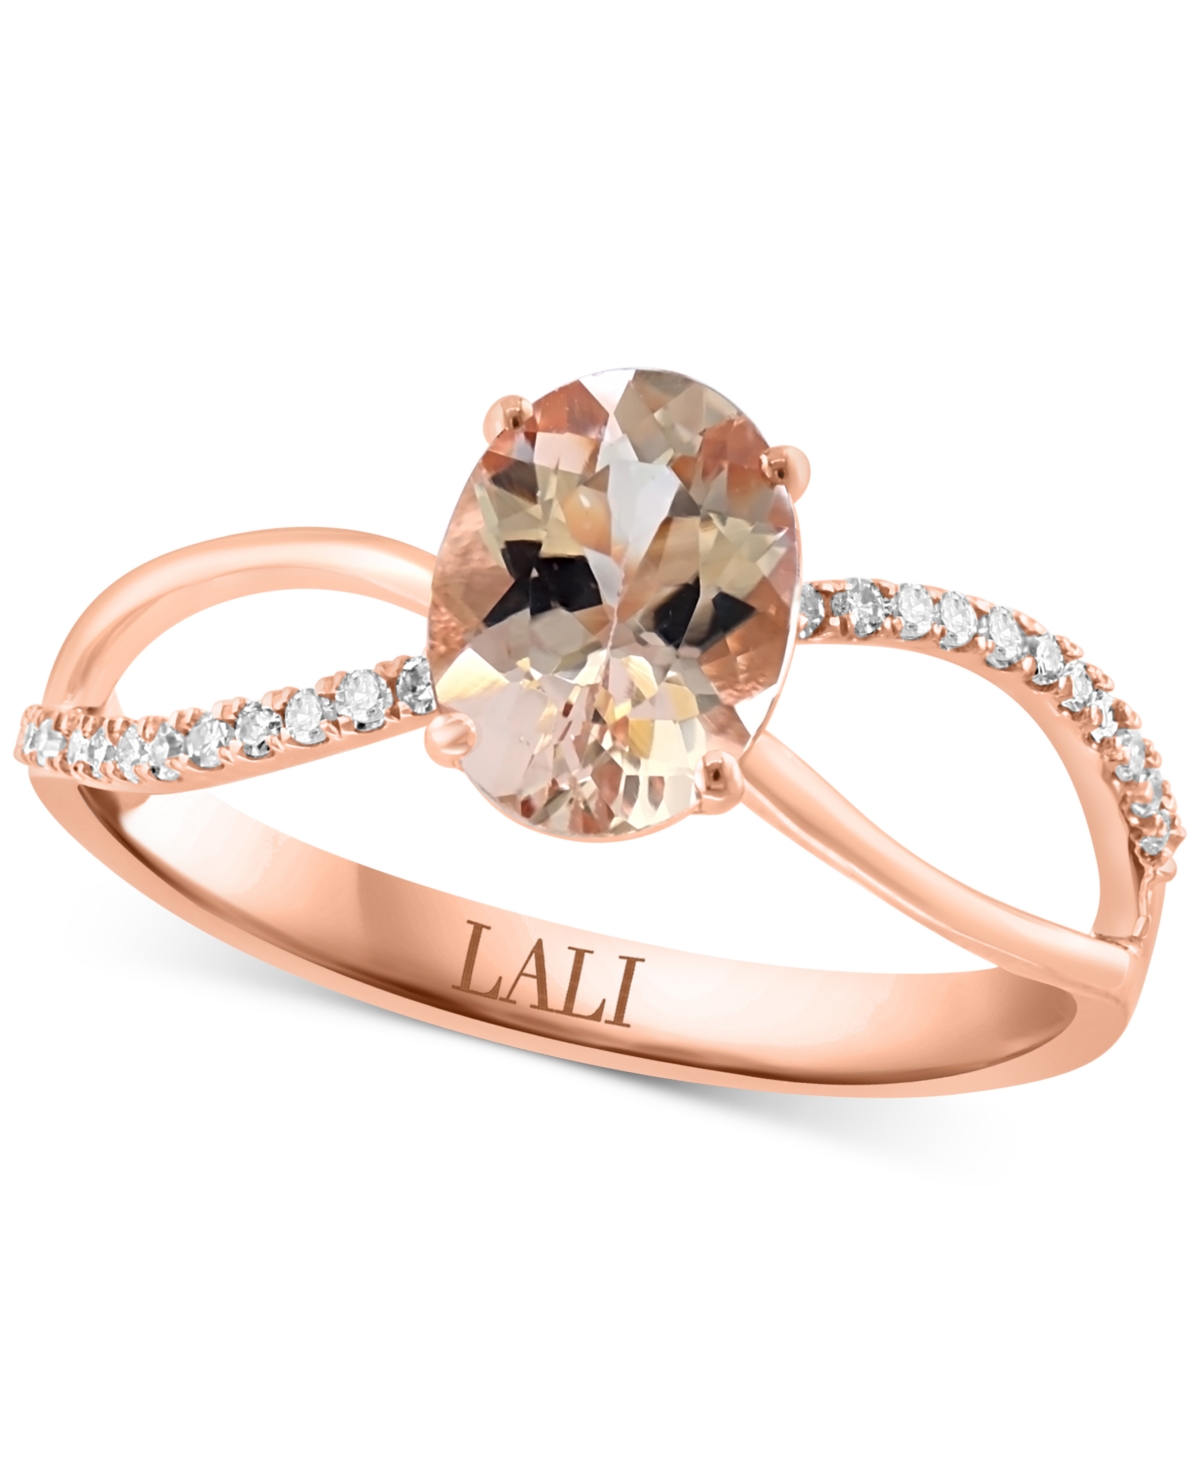 Morganite (1 ct. t.w.) & Diamond Accent Ring in 14k Rose Gold - Pink